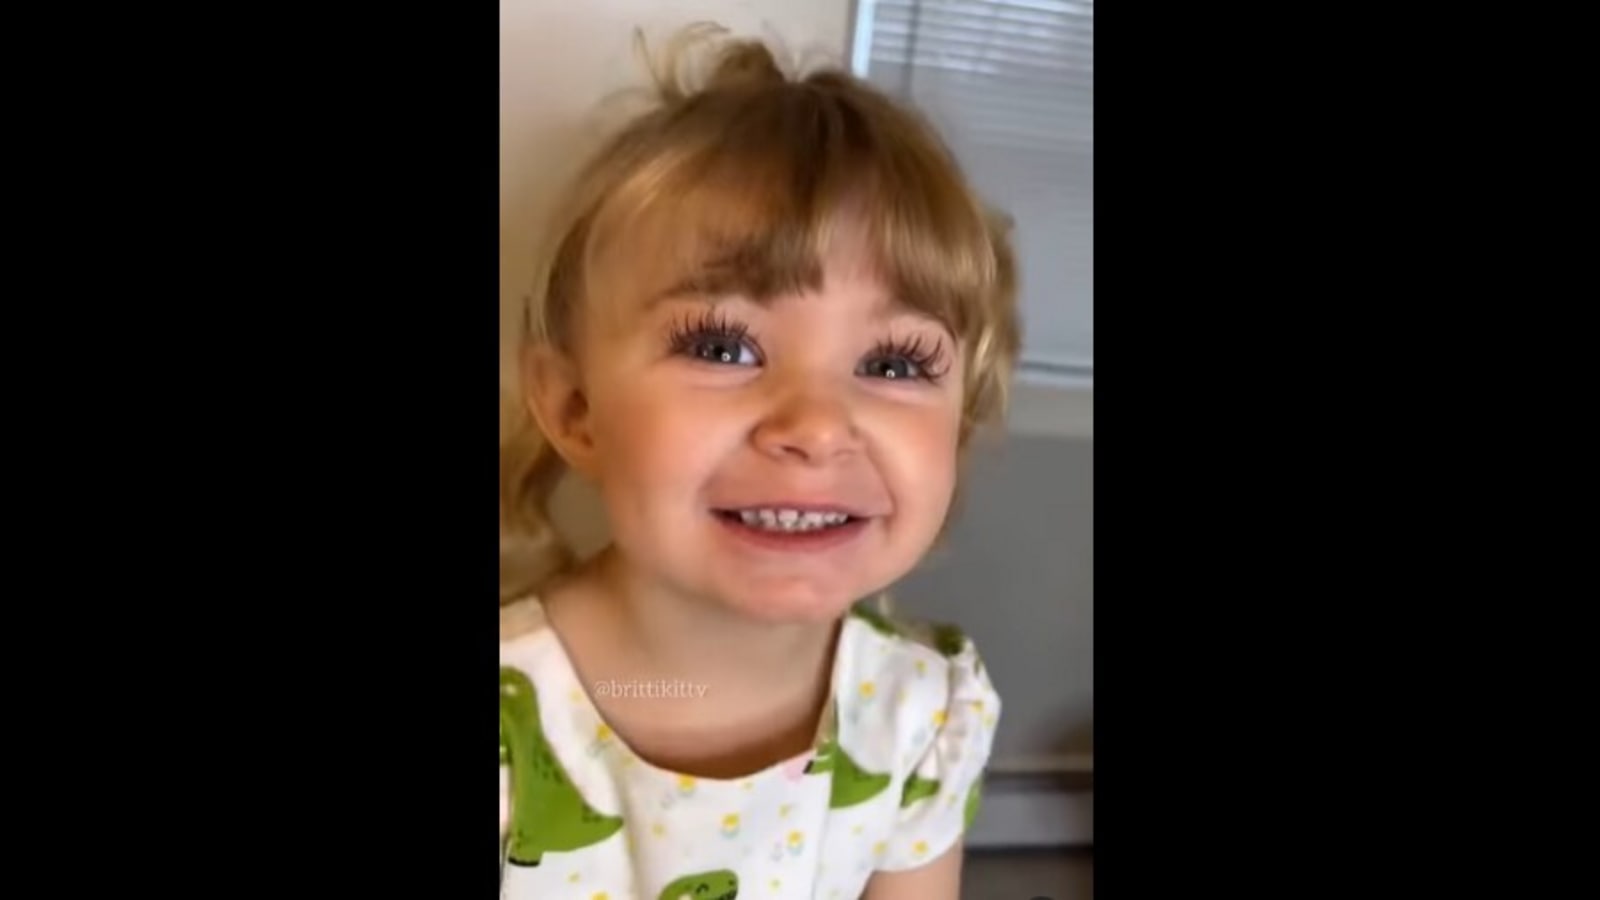 Little girl's reaction after putting on makeup is hilariously